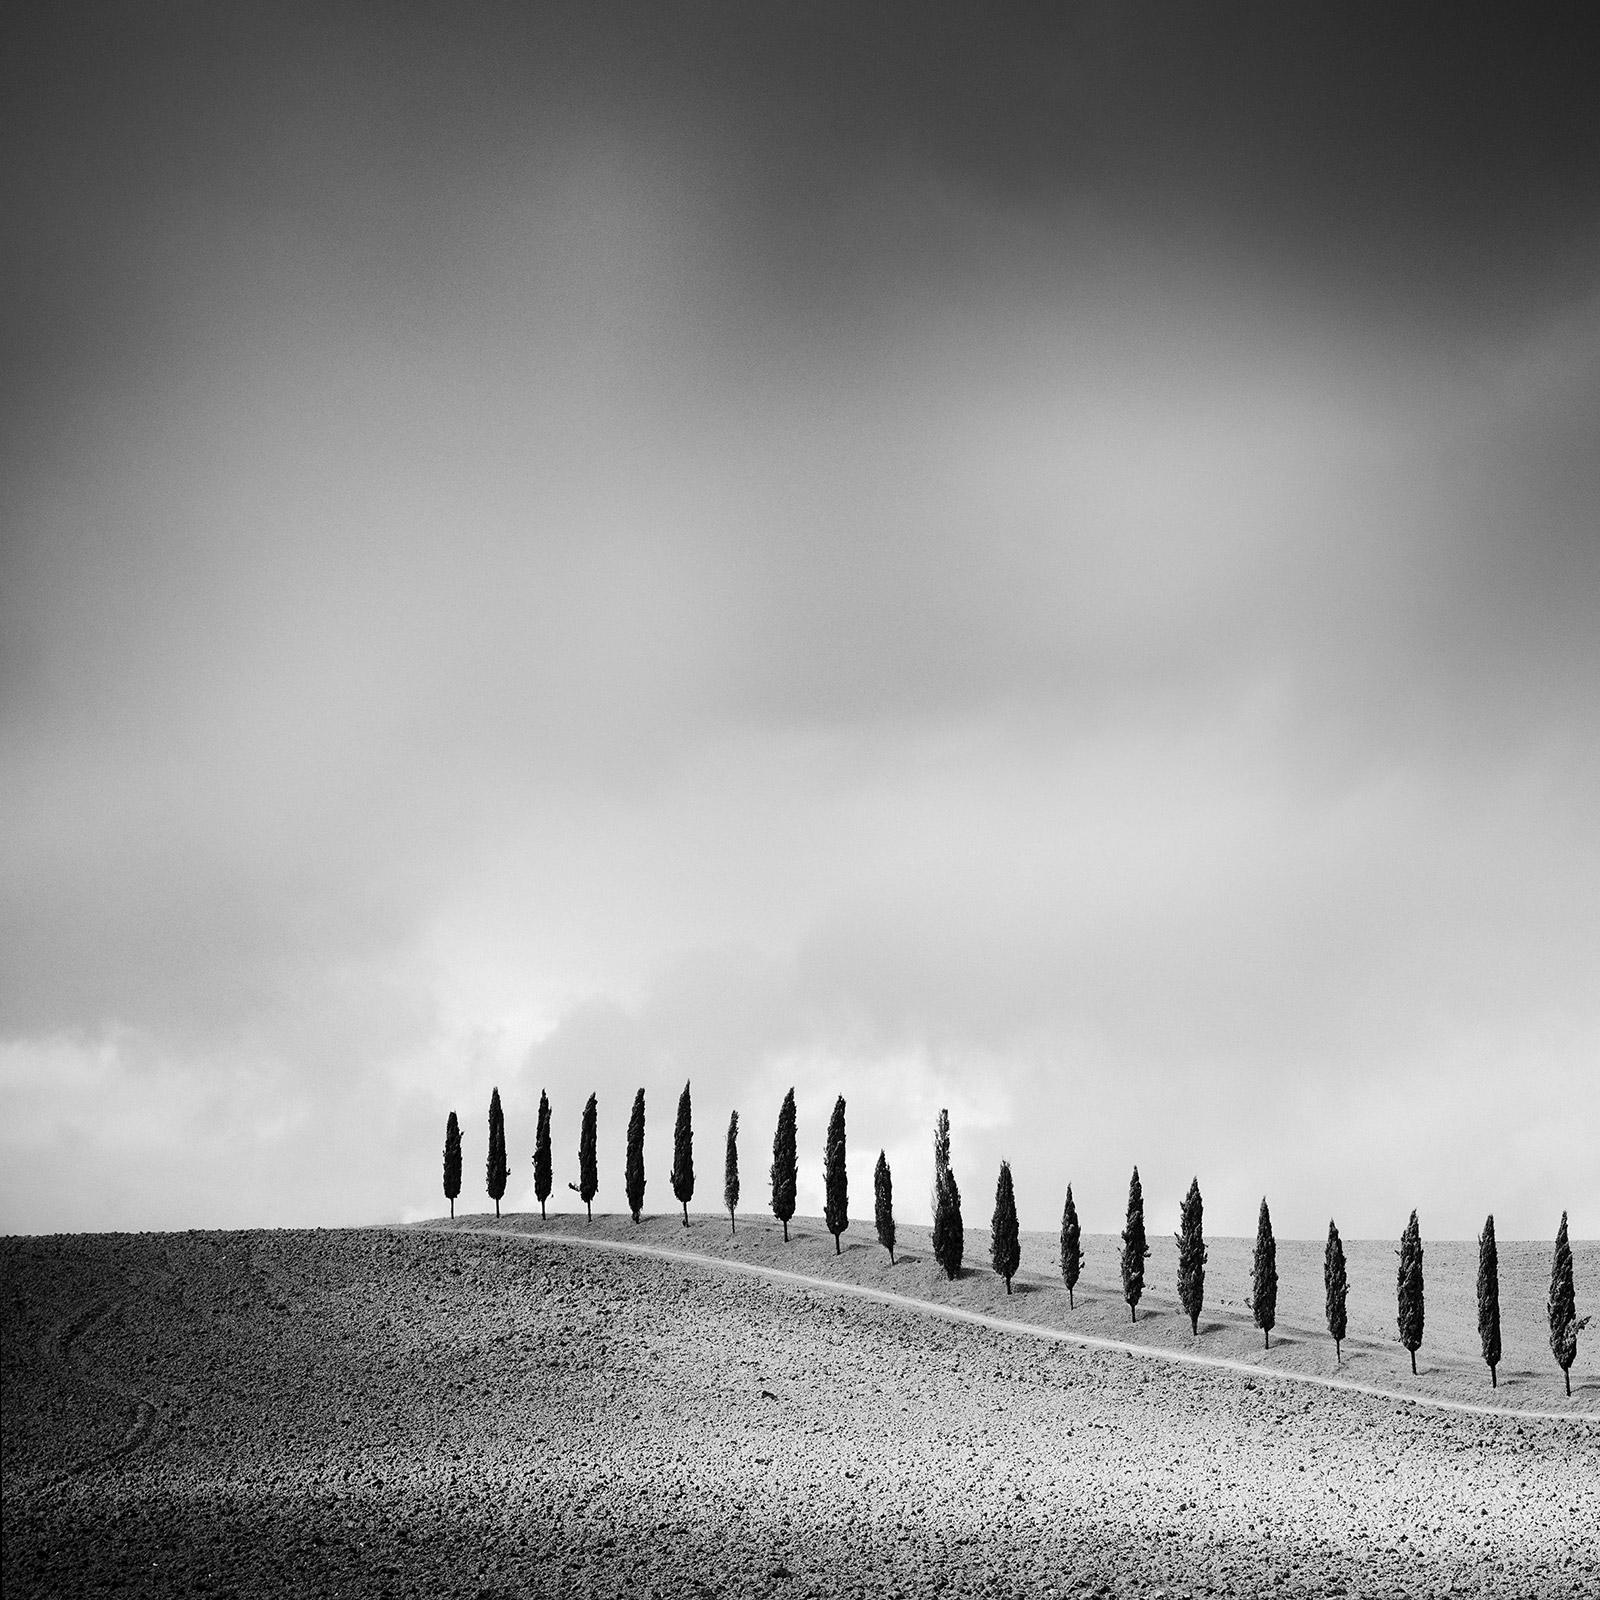 Gerald Berghammer Landscape Photograph - Row of Cypress Trees, Tuscany, Italy, black and white art photography, landscape